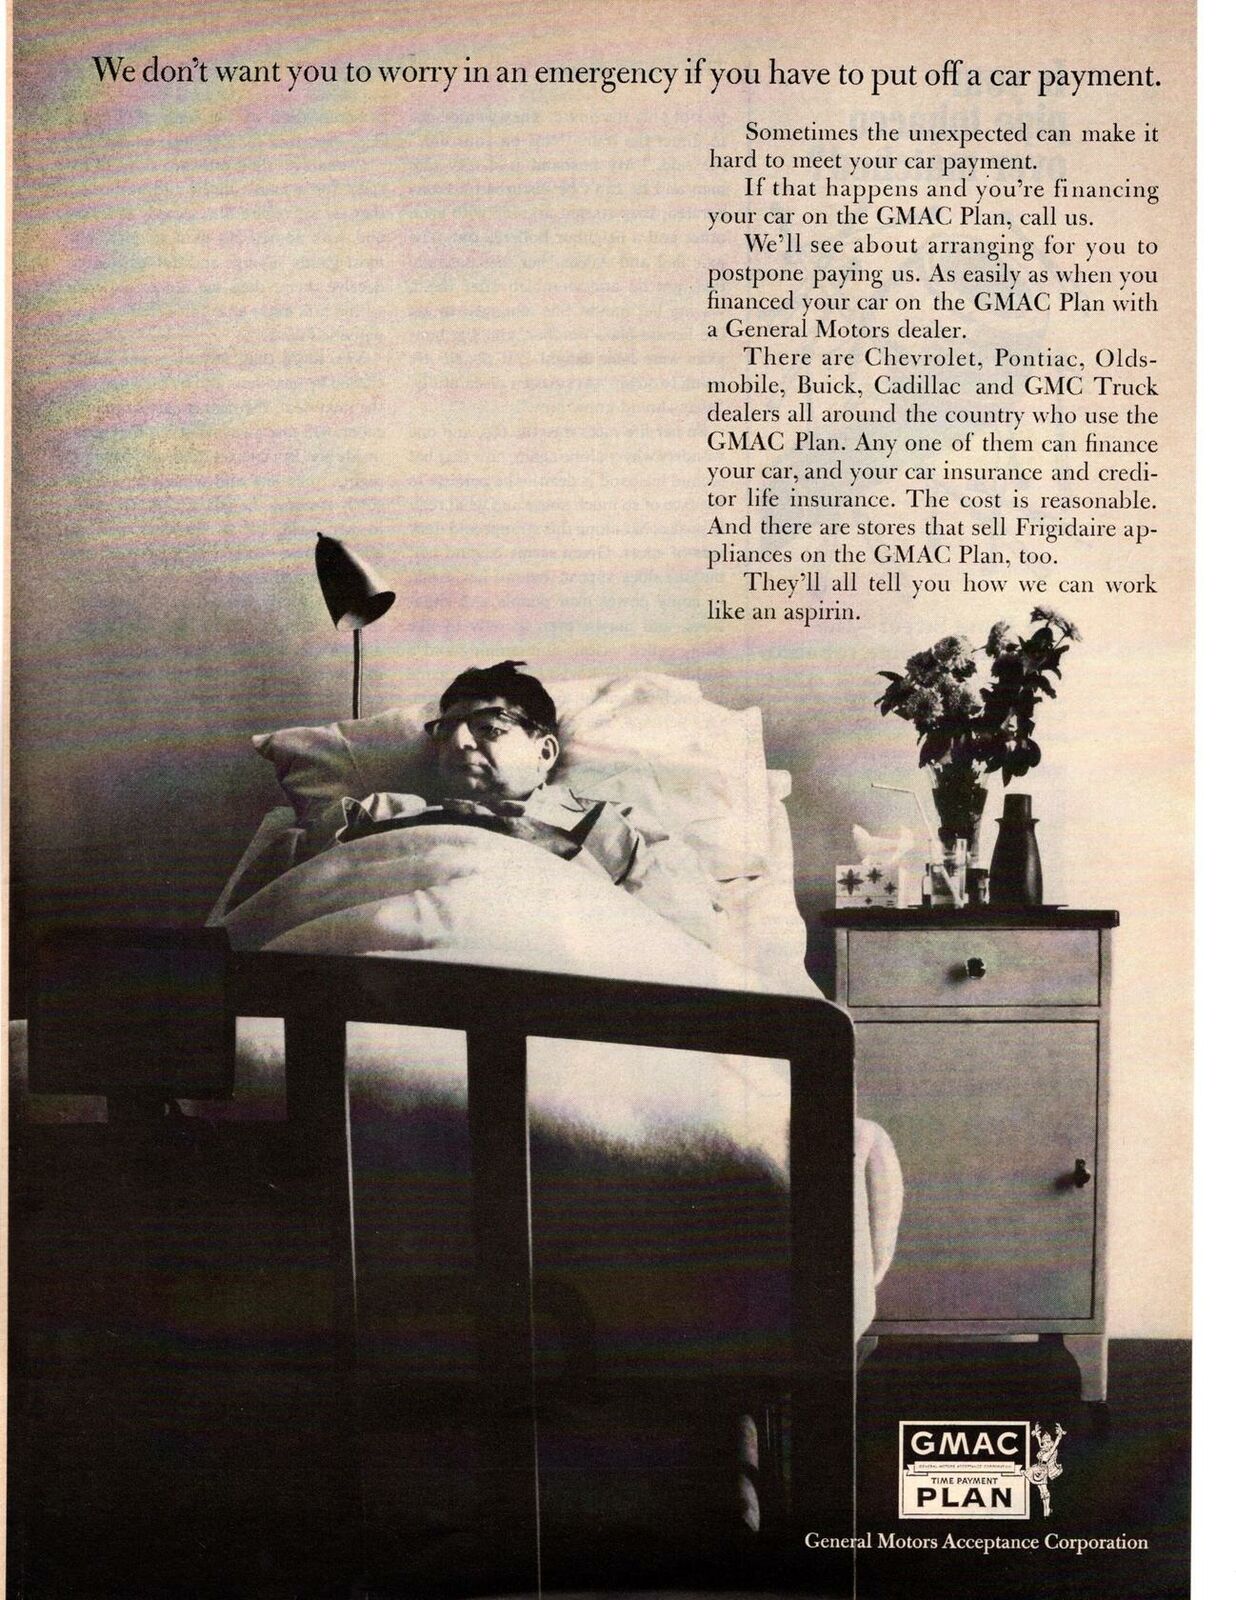 1967 GMAC Plan Financing Car Payment Sick In Bed Cold Tissues Flowers Print Ad